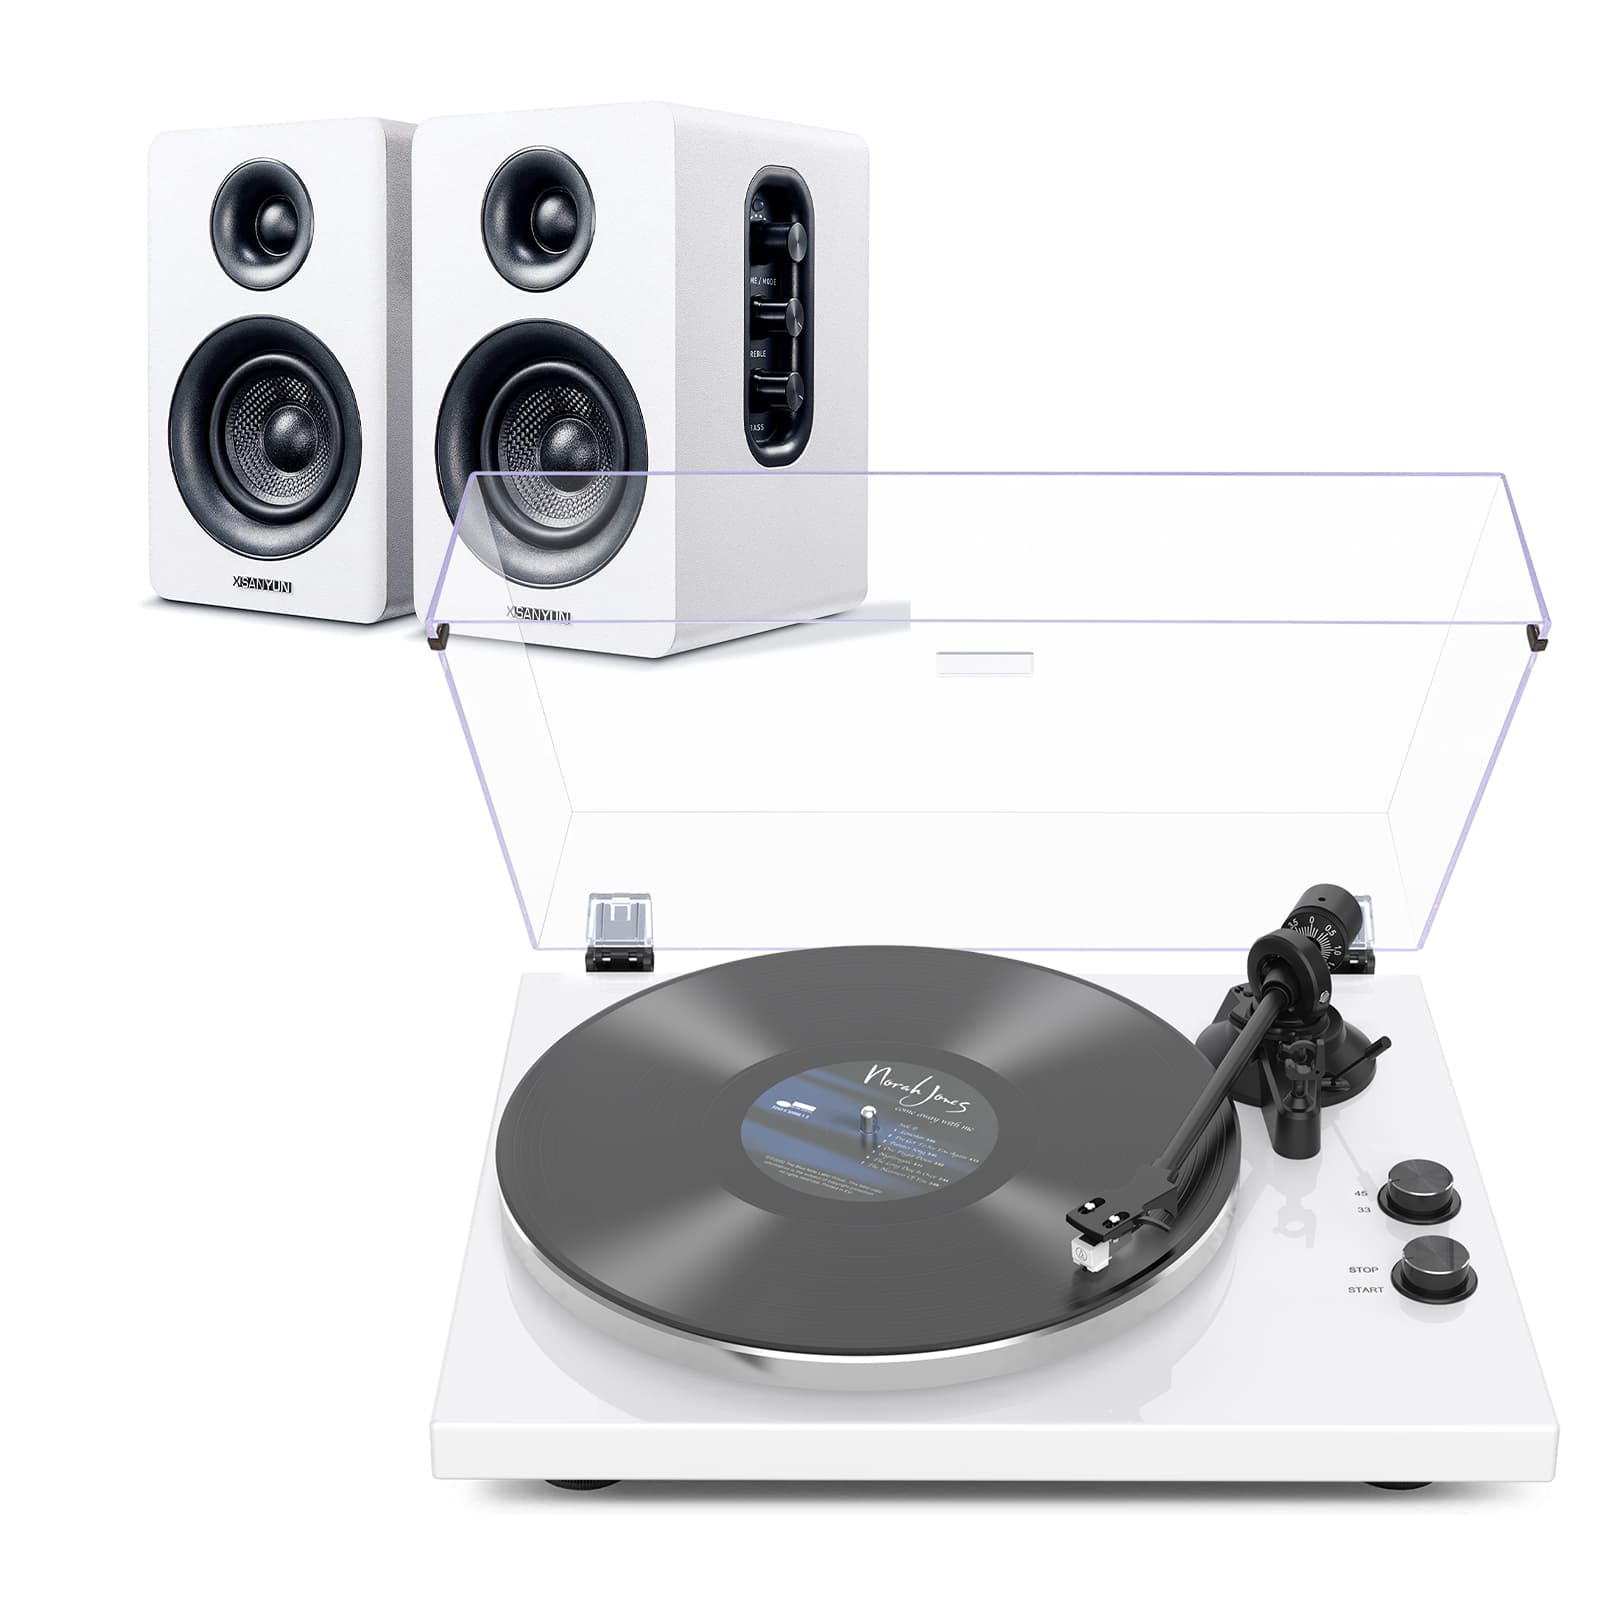 HQKZ-006 High Fidelity Turntable with Sanyun 60W Bluetooth 5.0 Active Speakers